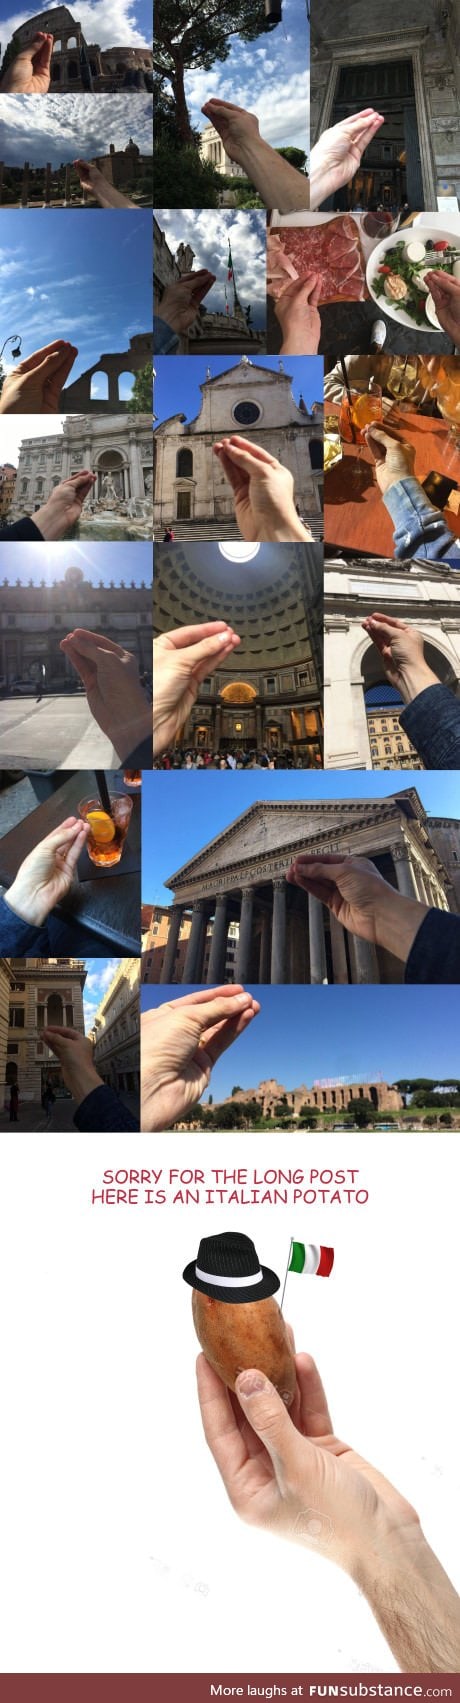 How visiting Italy looks like